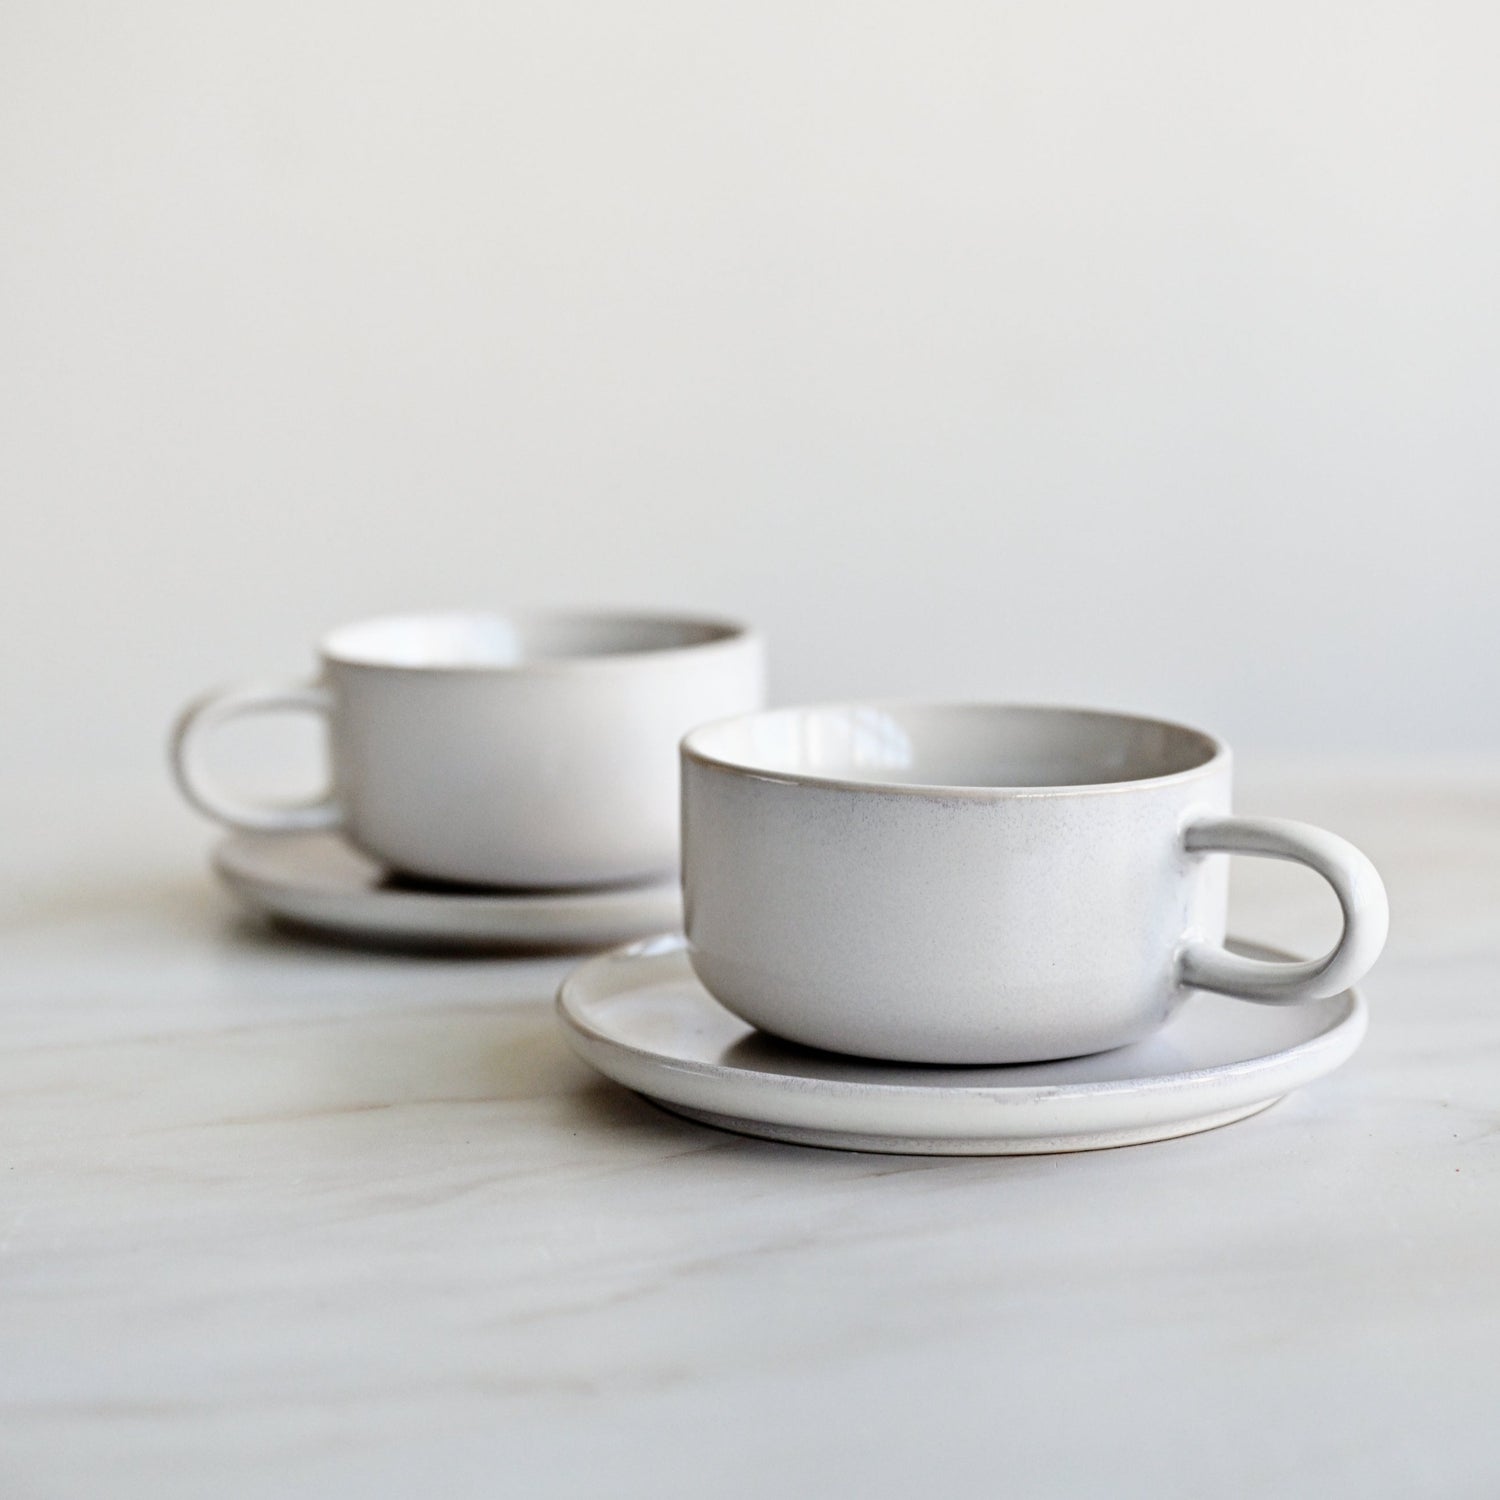 Relic Tea Cup and Saucer - Mist